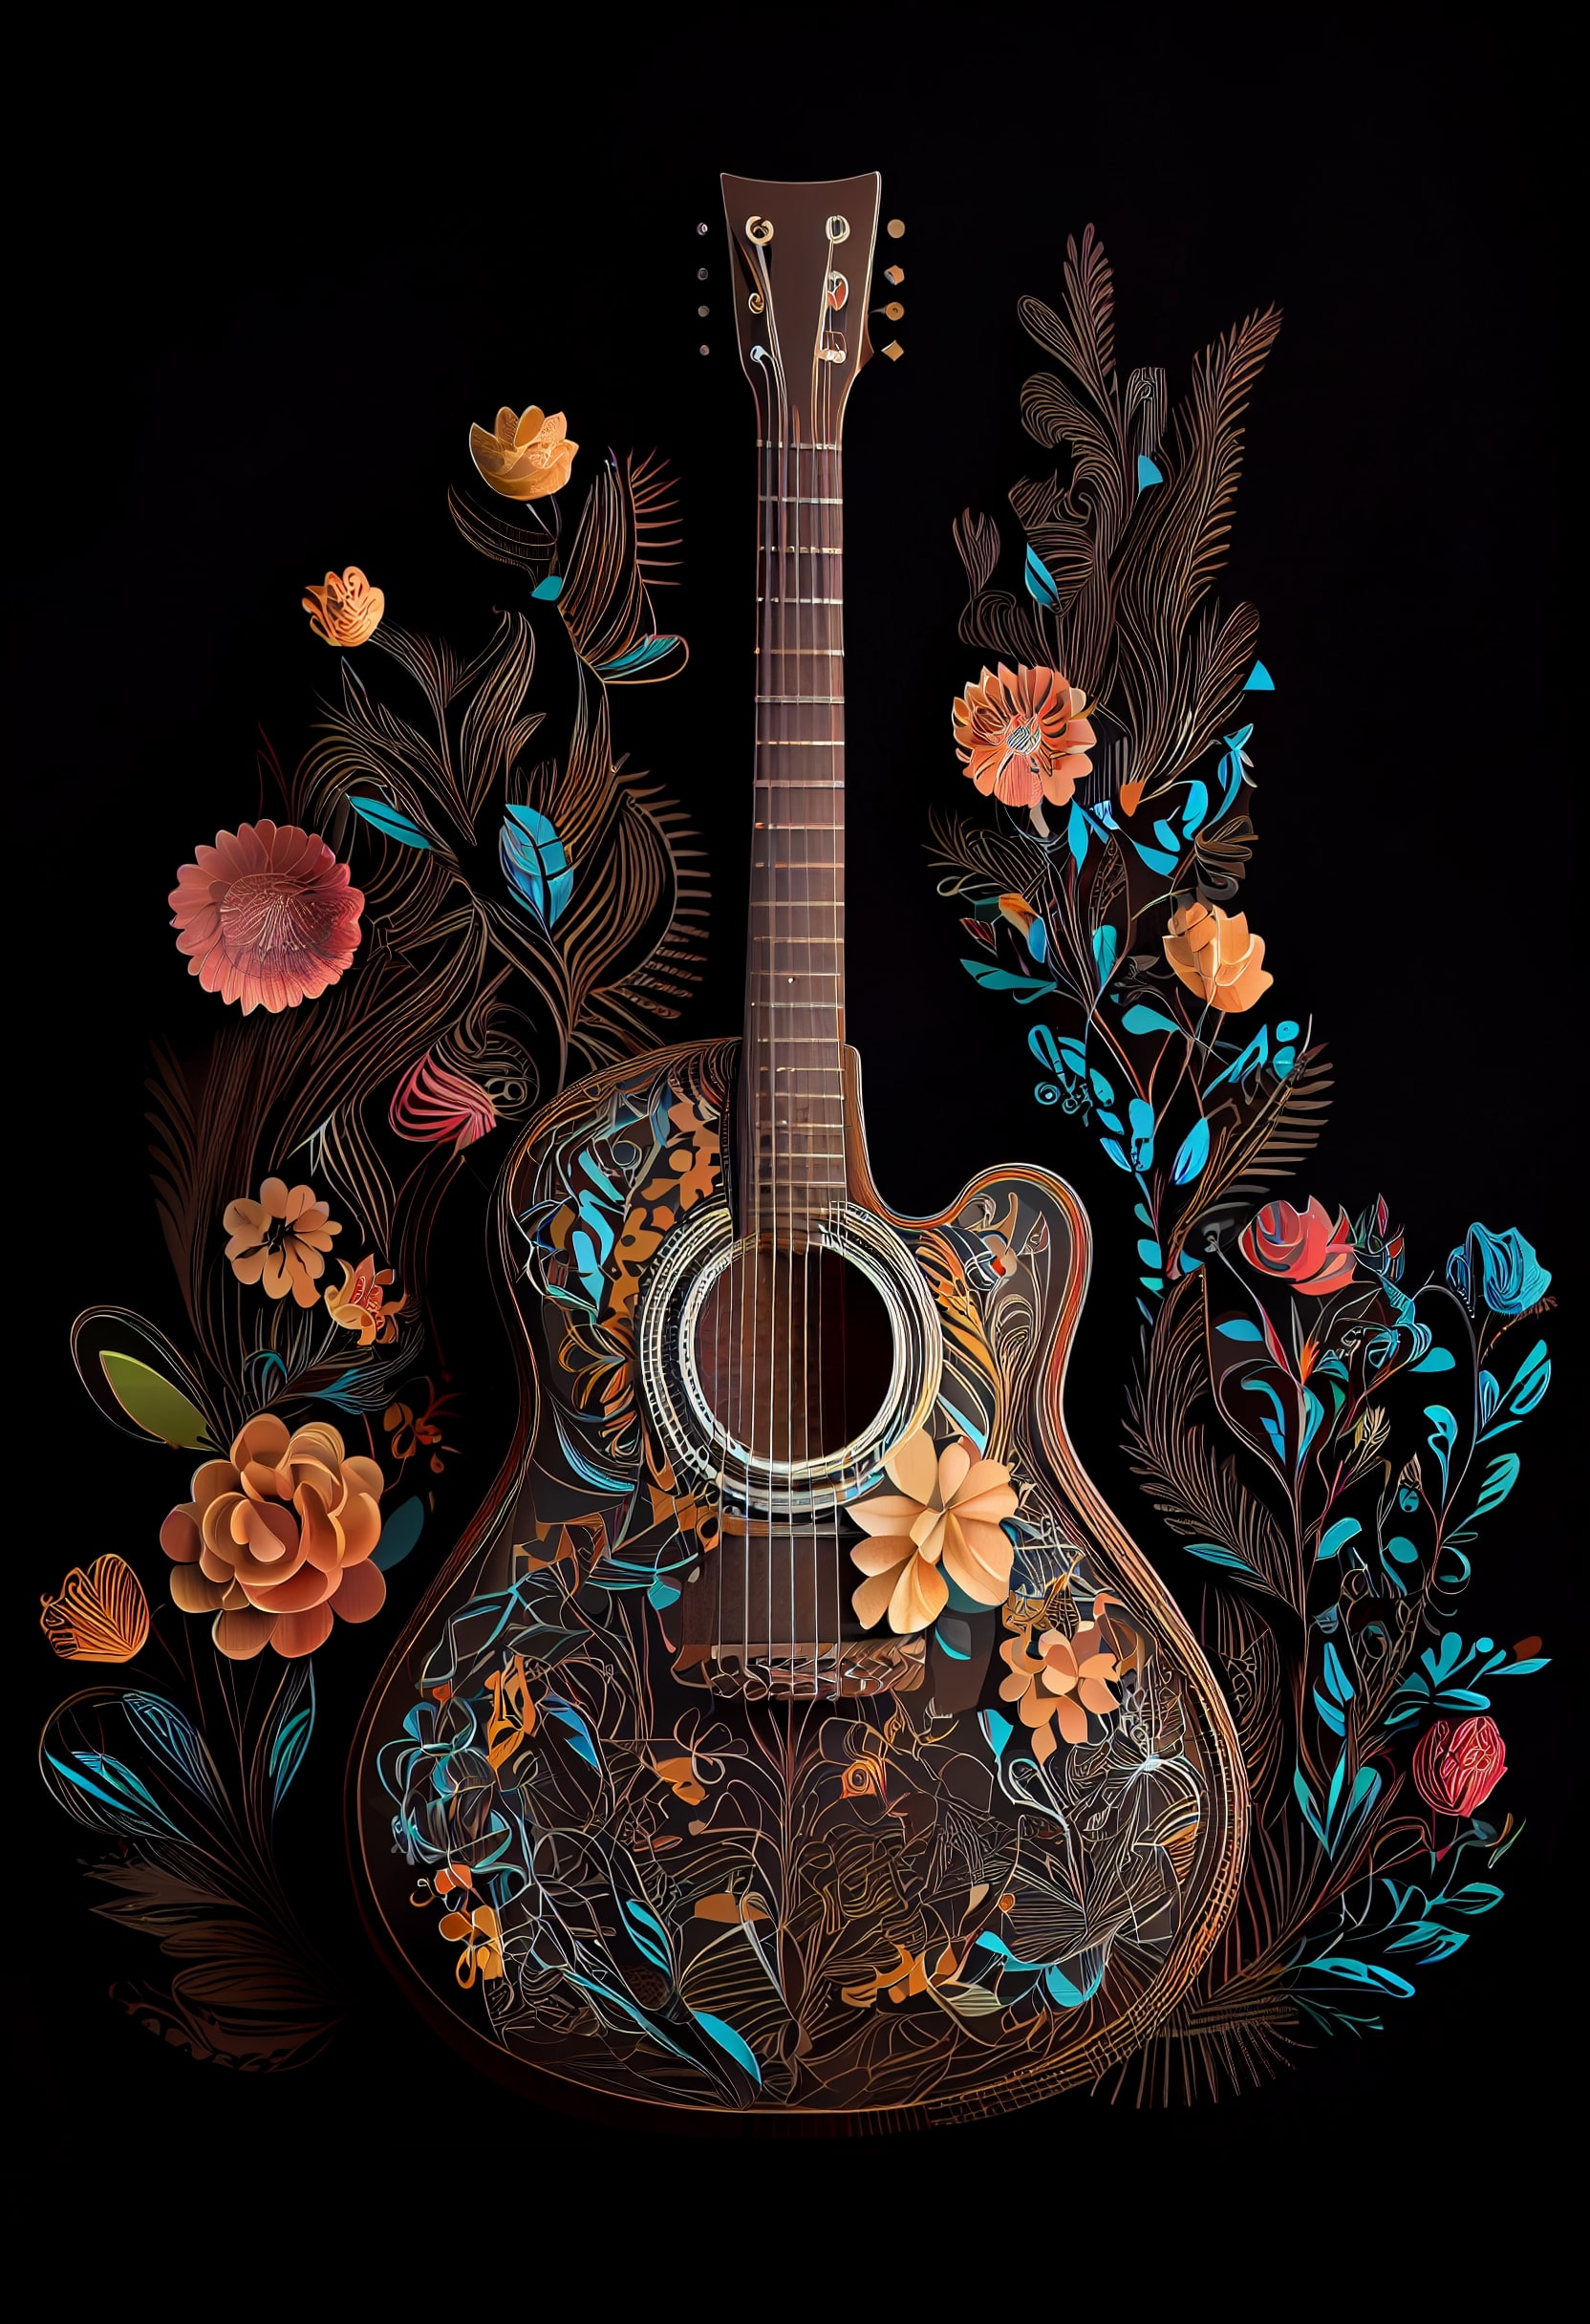 Painting of a guitar with flowers on it.